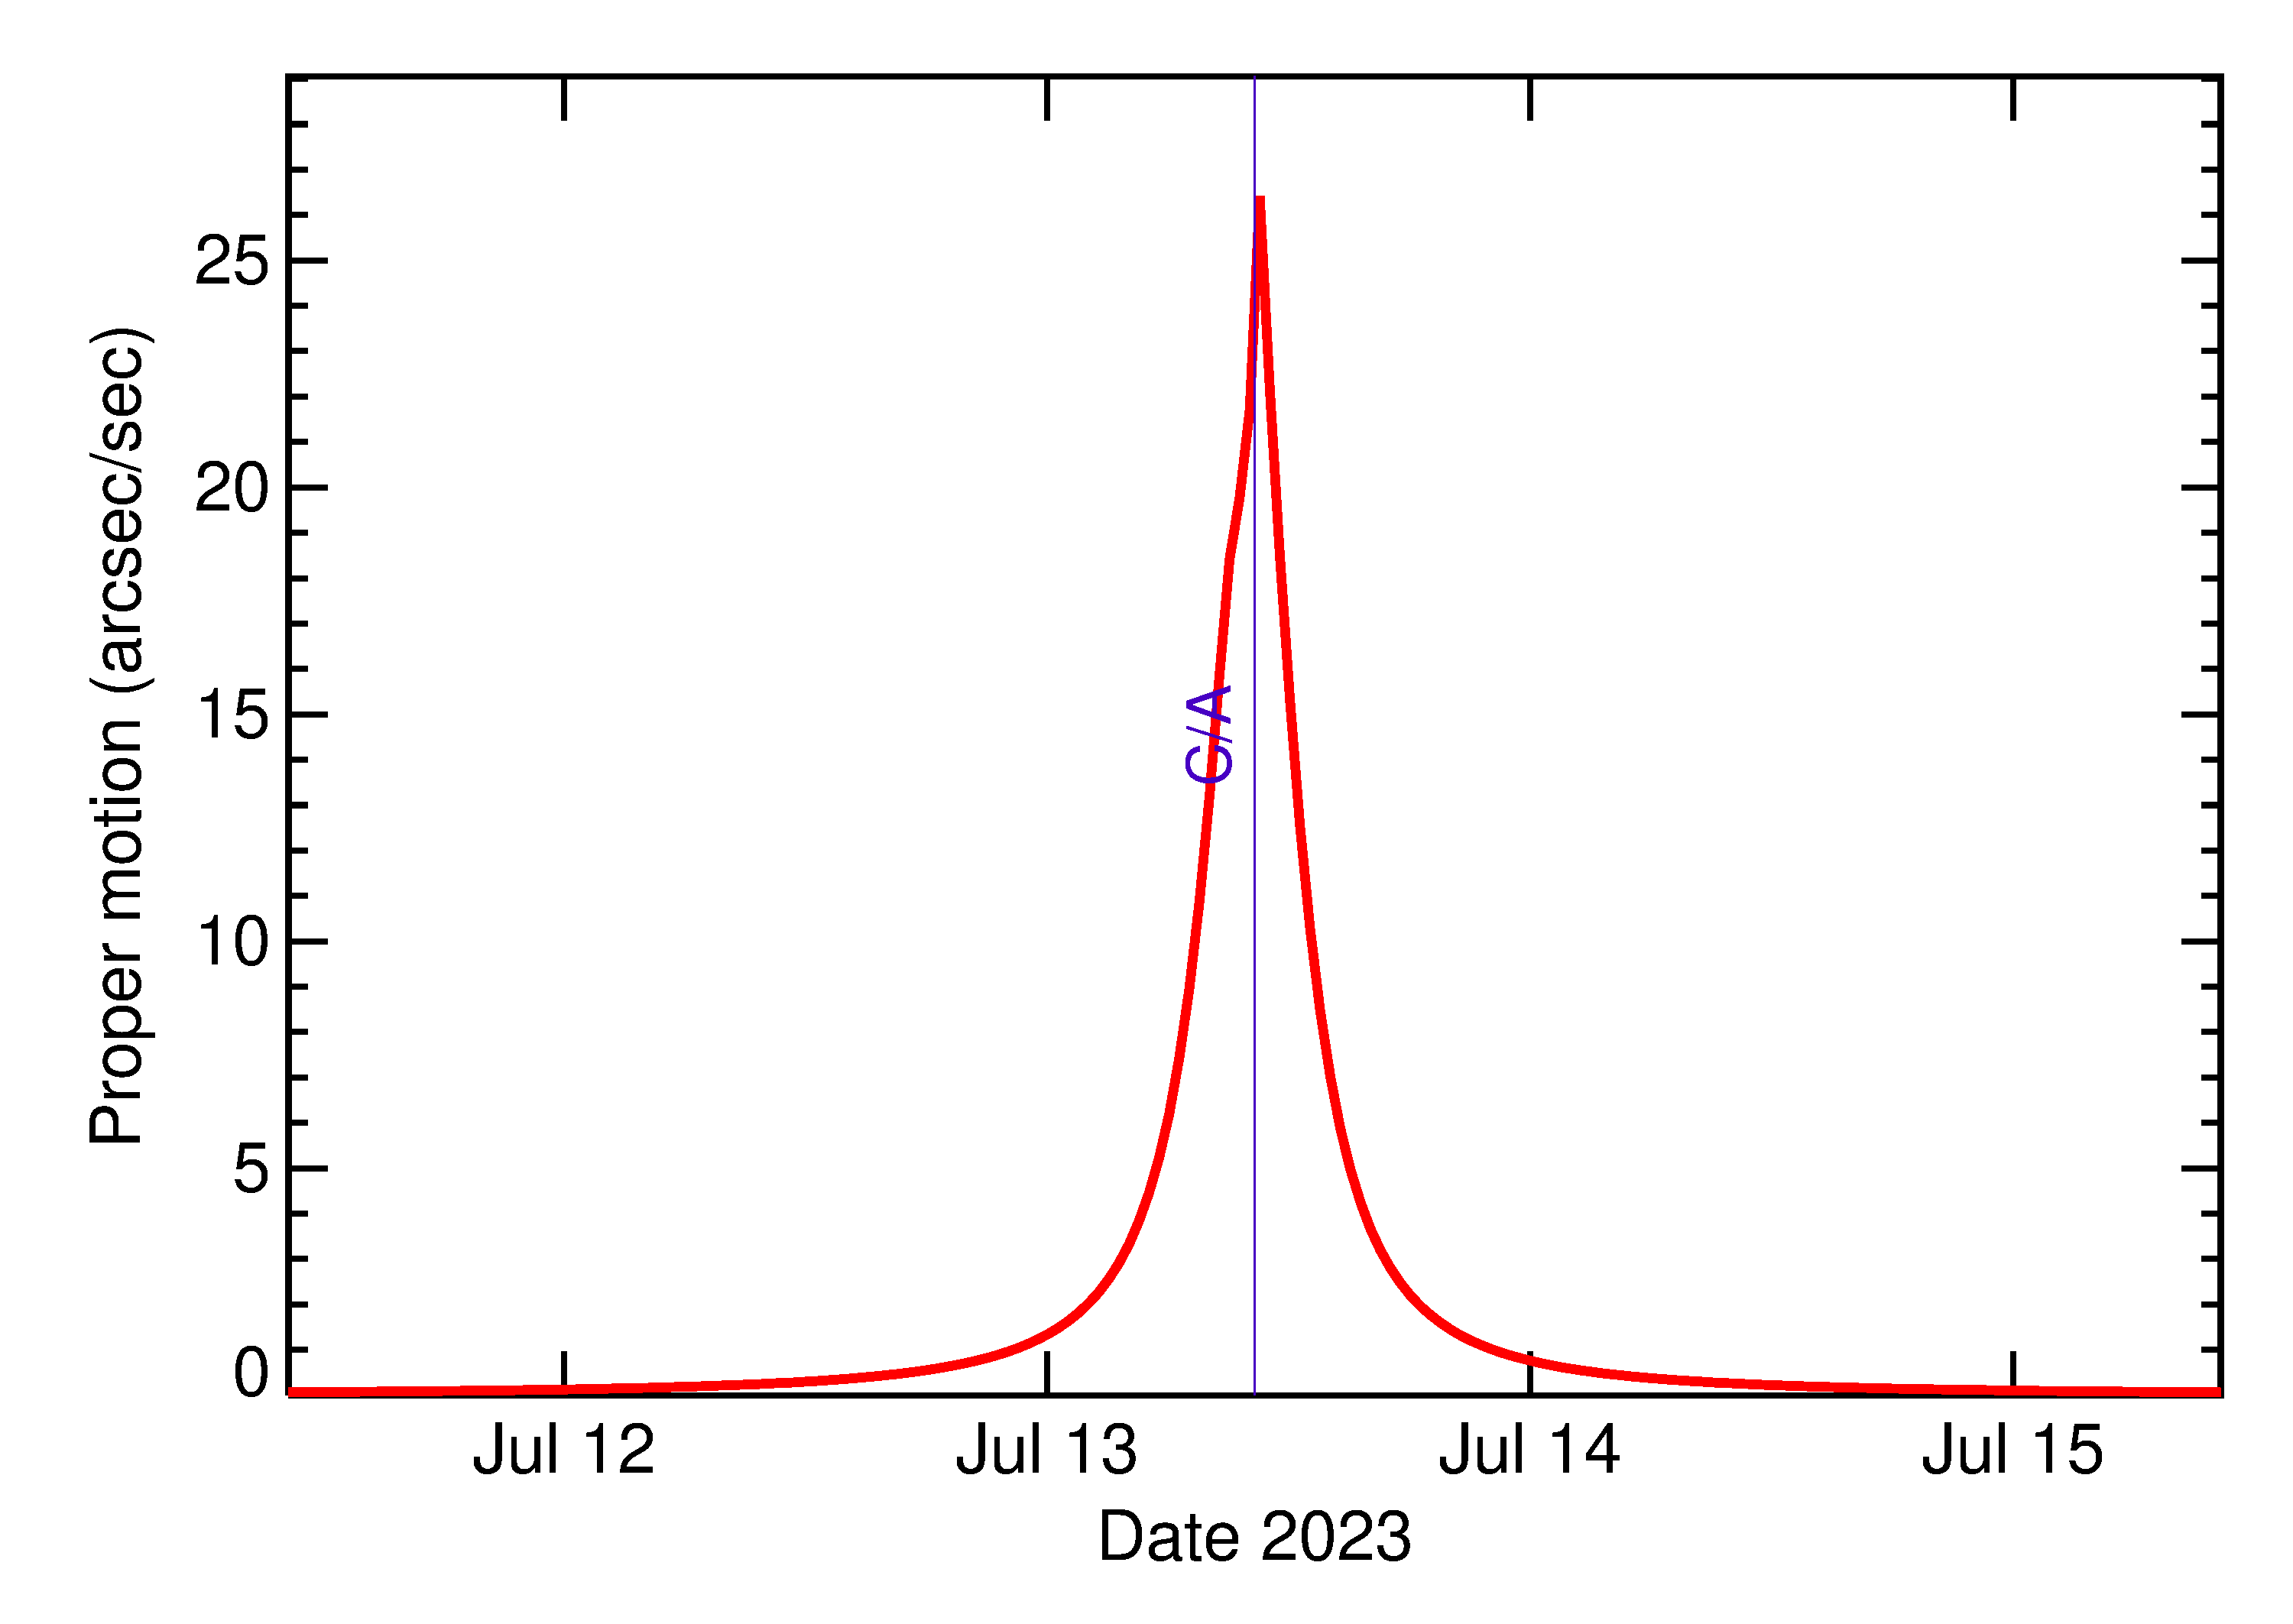 Proper motion rate of 2023 NT1 in the days around closest approach